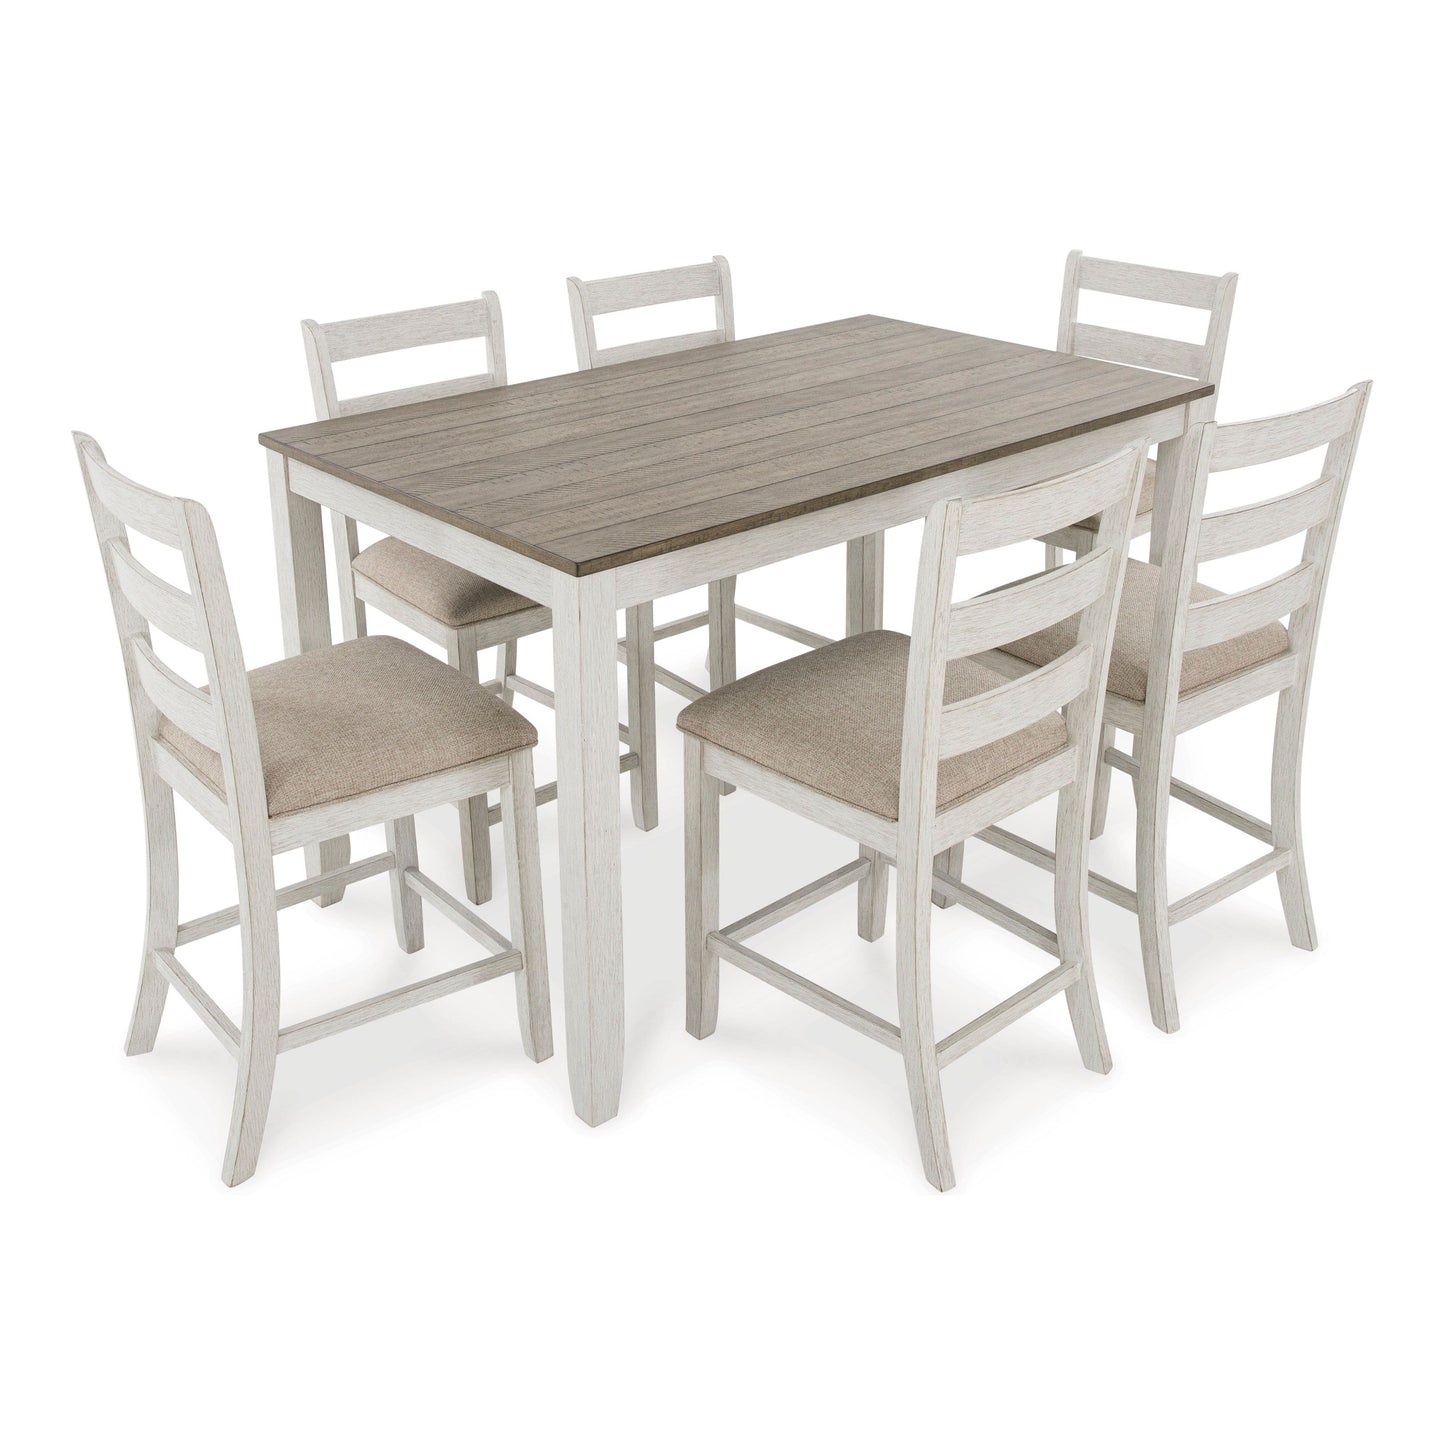 SKEMPTON COUNTER DINING SET - 6 BAR STOOLS AND TABLE